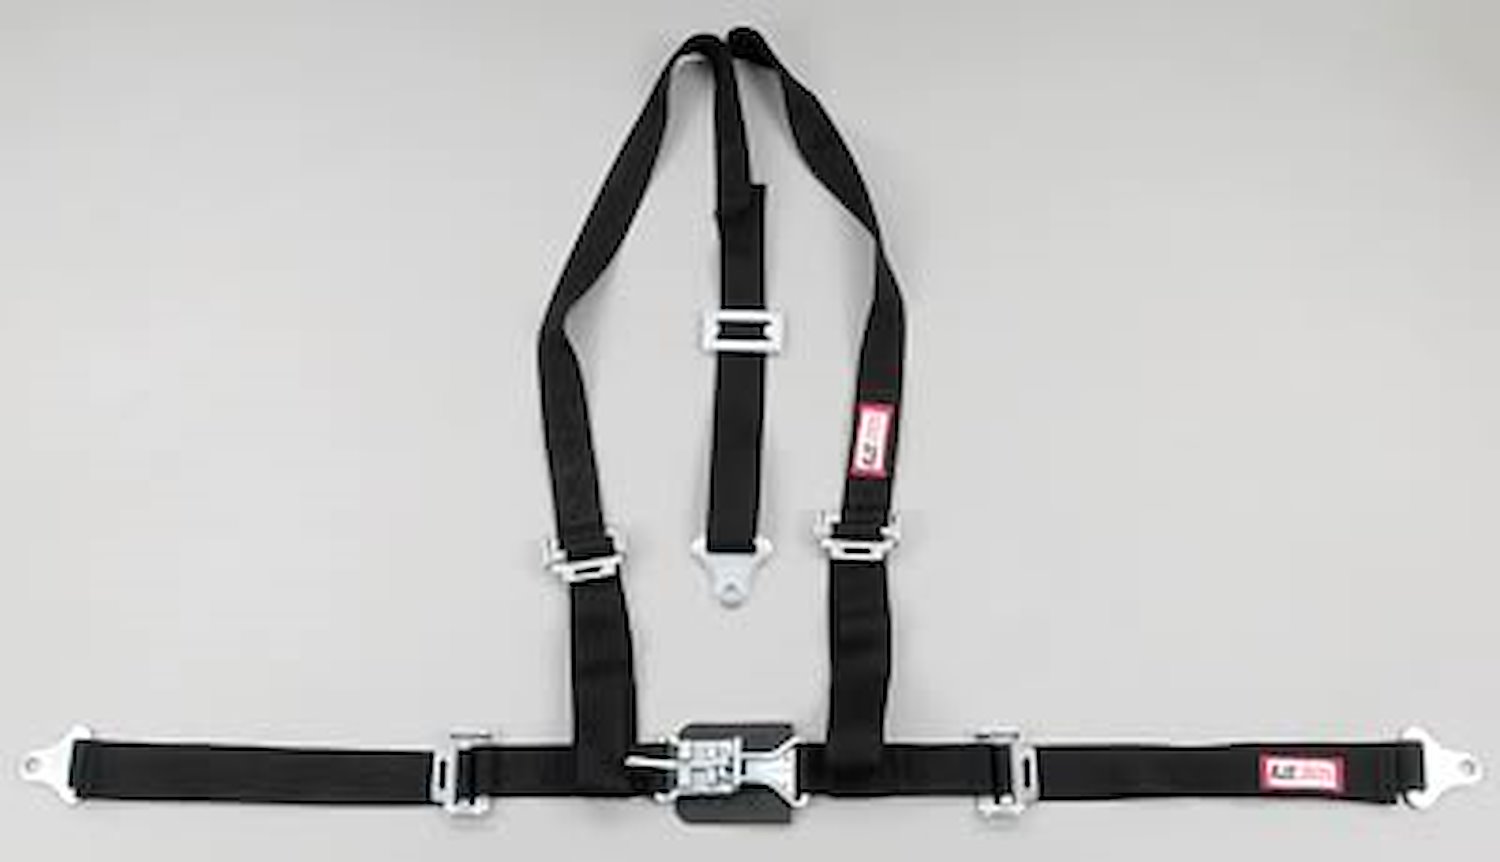 NON-SFI L&L HARNESS 2 PULL DOWN Lap Belt SEWN IN 2 S.H. Individual ROLL BAR Mount ALL WRAP ENDS GRAY